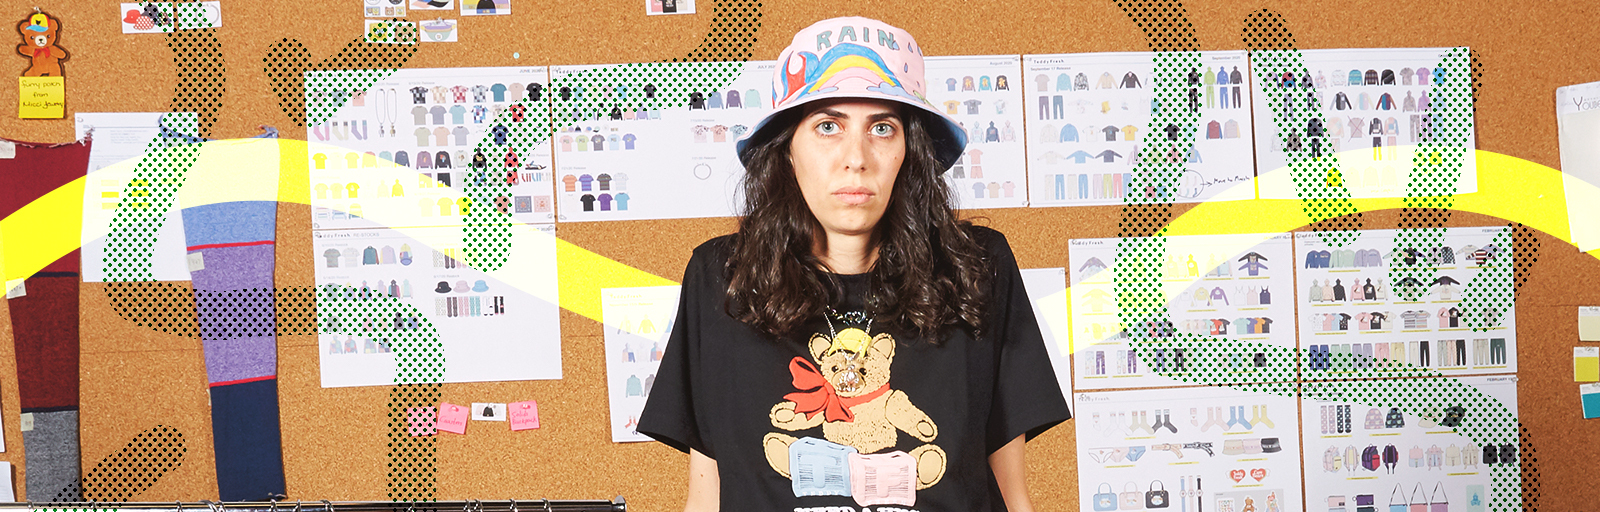 We Chopped It Up With Teddy Fresh's Hila Klein On The Future Of The Brand